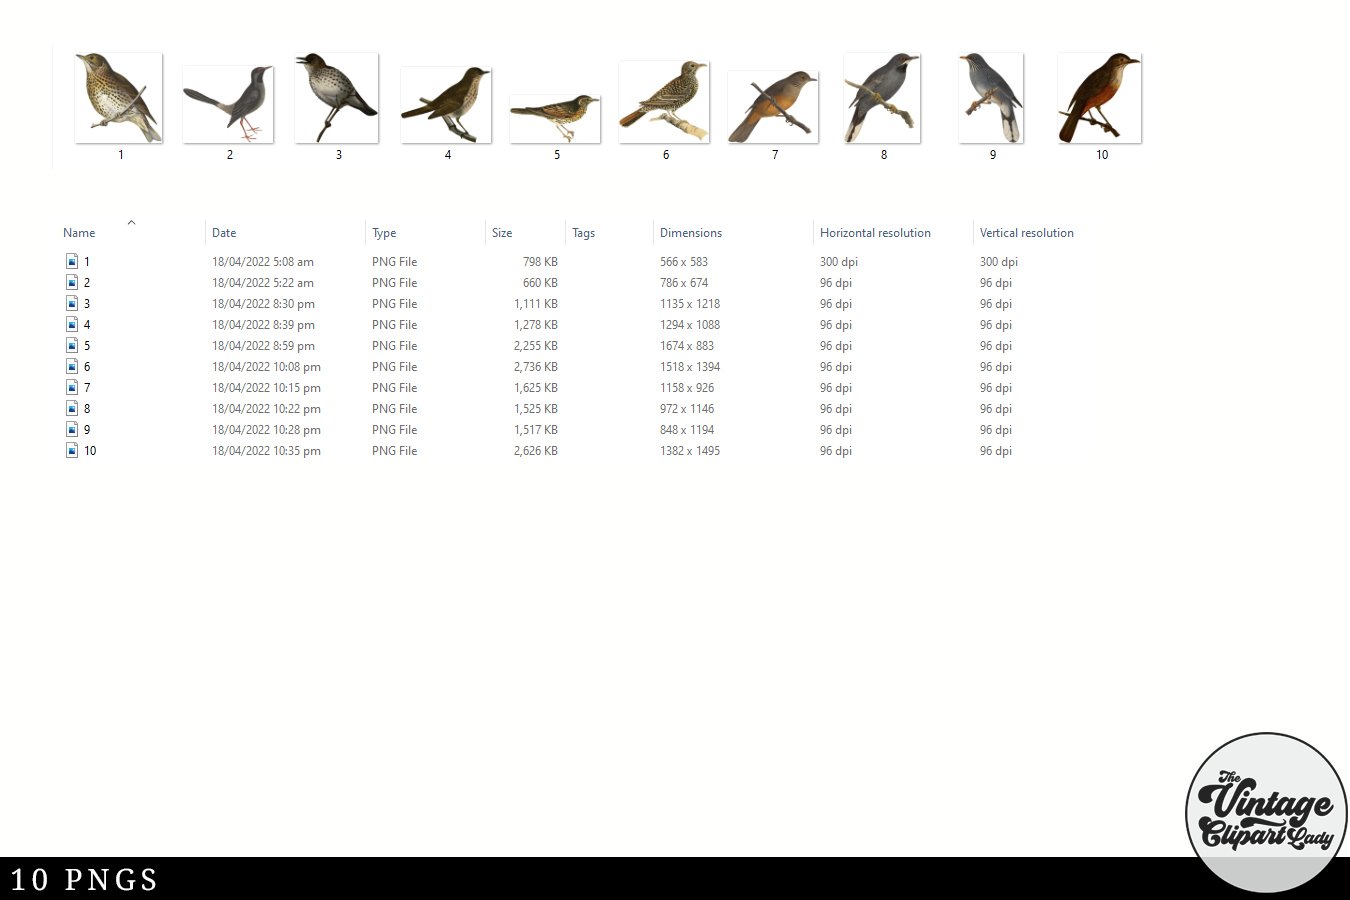 Columns with birds, and data under each of them.